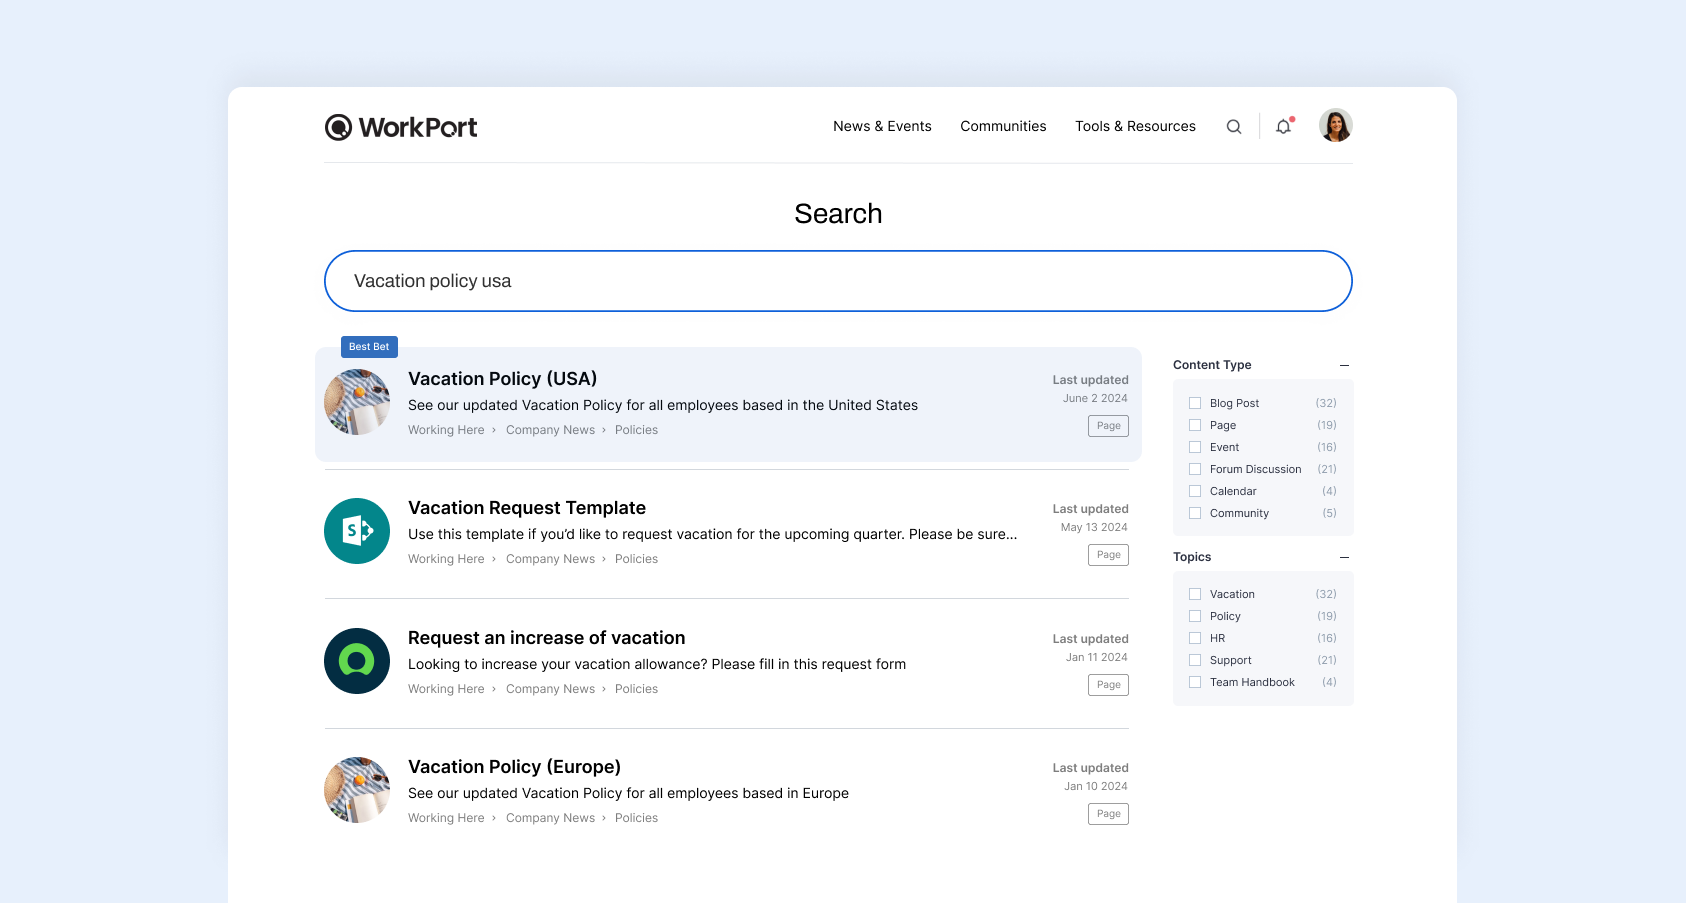 A screenshot of a modern intranet that optimizes technology using powerful search to improve productivity